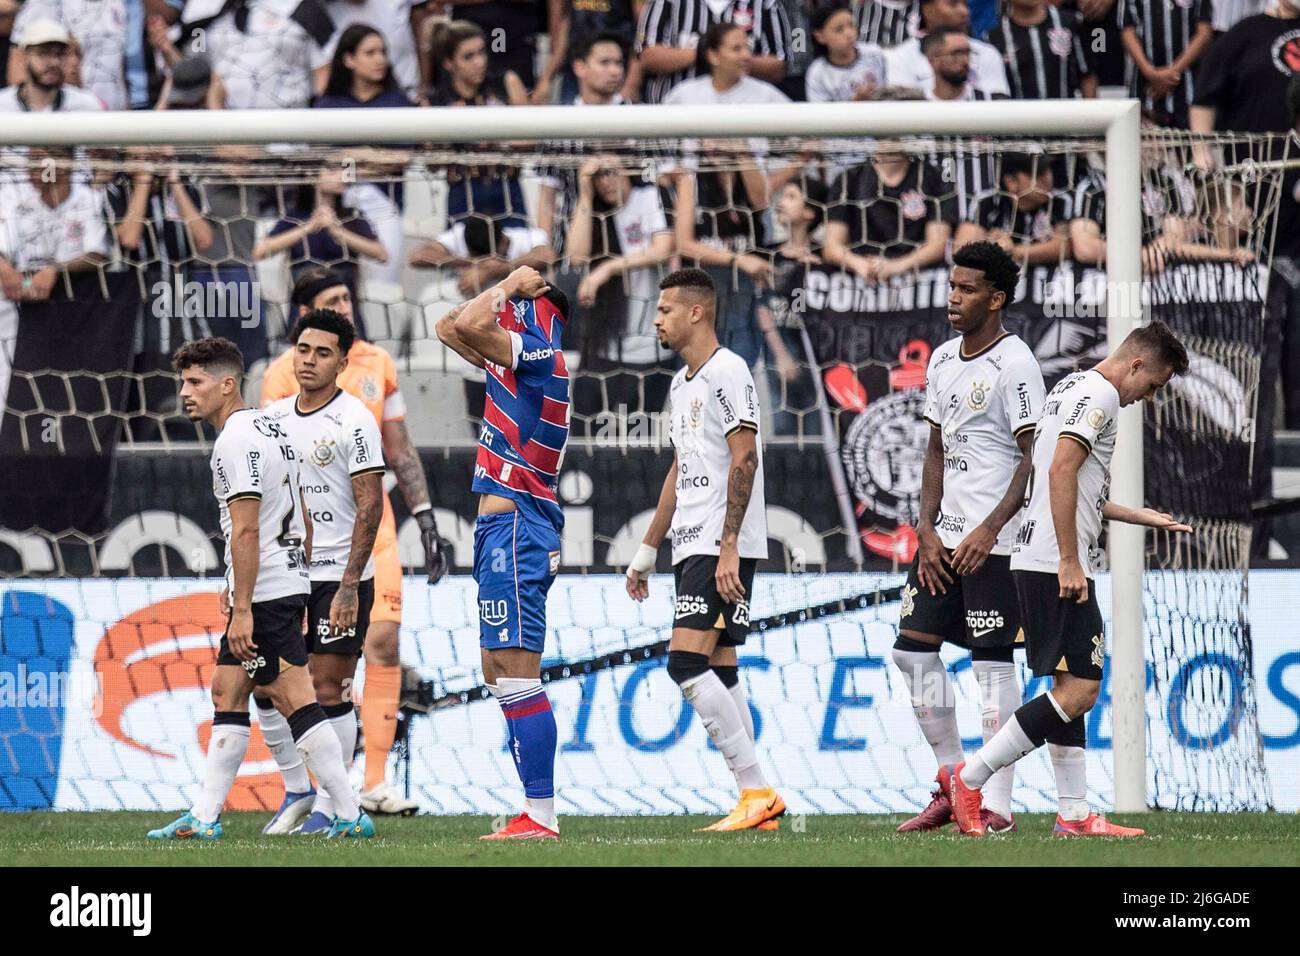 SÃO PAULO, SP - 01.05.2022: CORINTHIANS X FORTALEZA - Lamentation of the Fortaleza player during the game between Corinthians and Fortaleza held at Neo Química Arena in São Paulo, SP. The match is valid for the 4th round of the Brasileirão 2022. (Photo: Marco Galvão/Fotoarena) Stock Photo